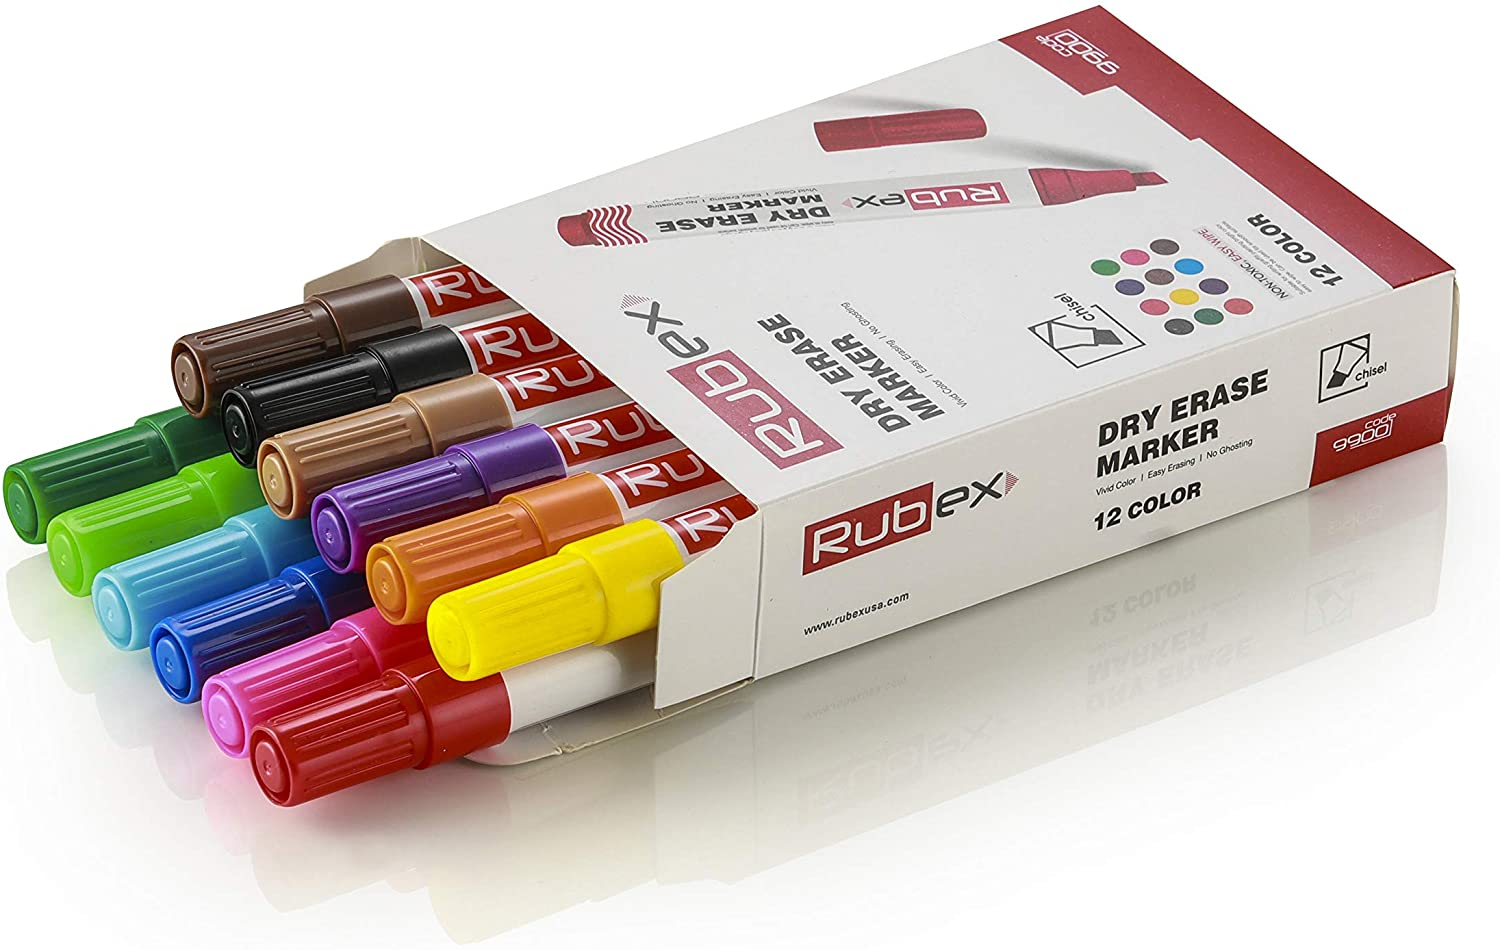 Dry Erase Marker , Set of 12 Colored Chisel Tip Low-Odor Ink Whiteboard Erasable Markers , Supplies for School, Teaching, Office, Home, Classrooms & Kids , Assorted Pack